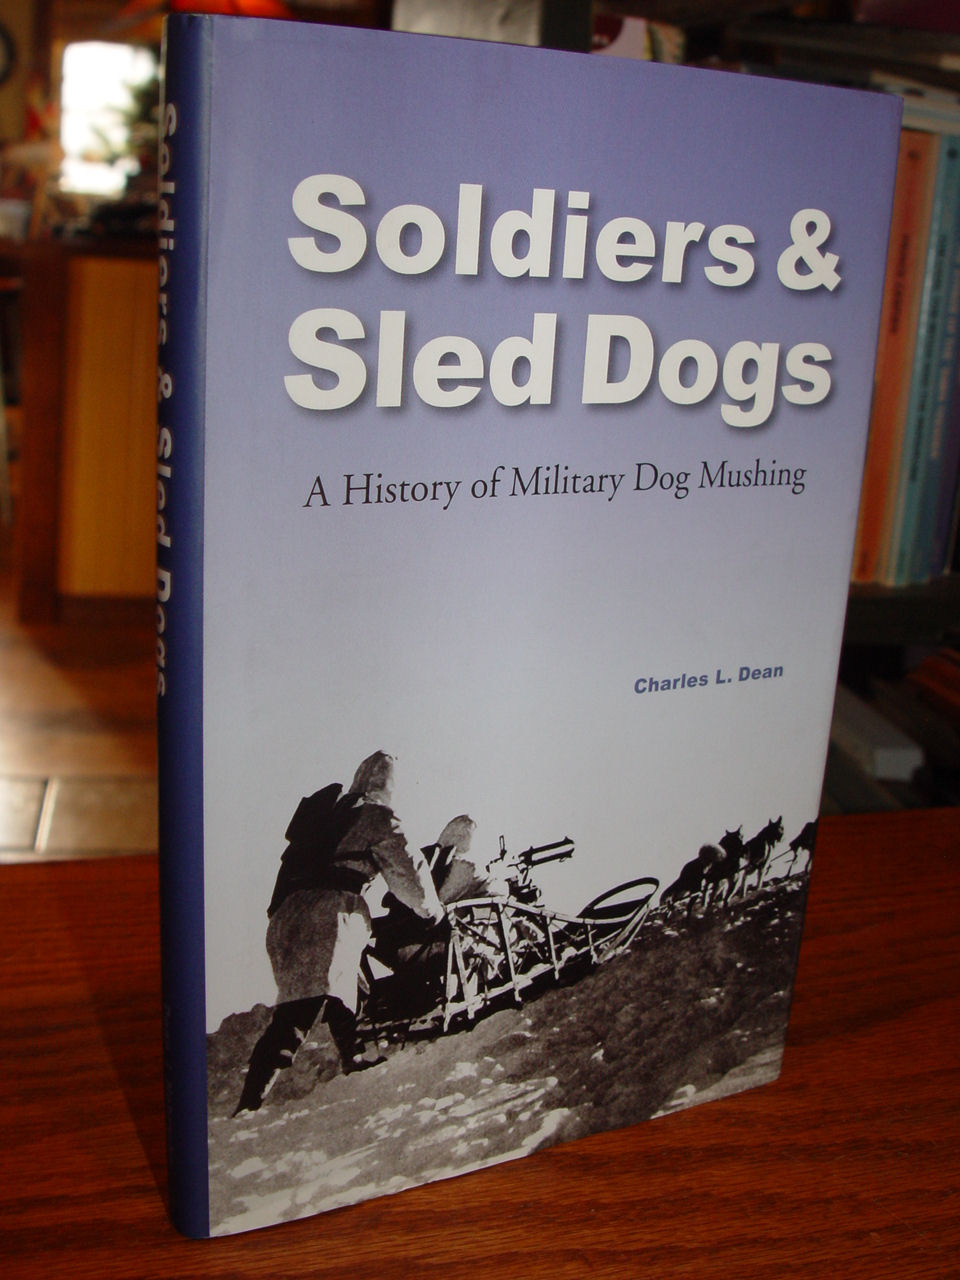 Soldiers &
                        Sled Dogs; A History of Military Dog Mushing by
                        Charles L Dean 2005 ~ Pets / War